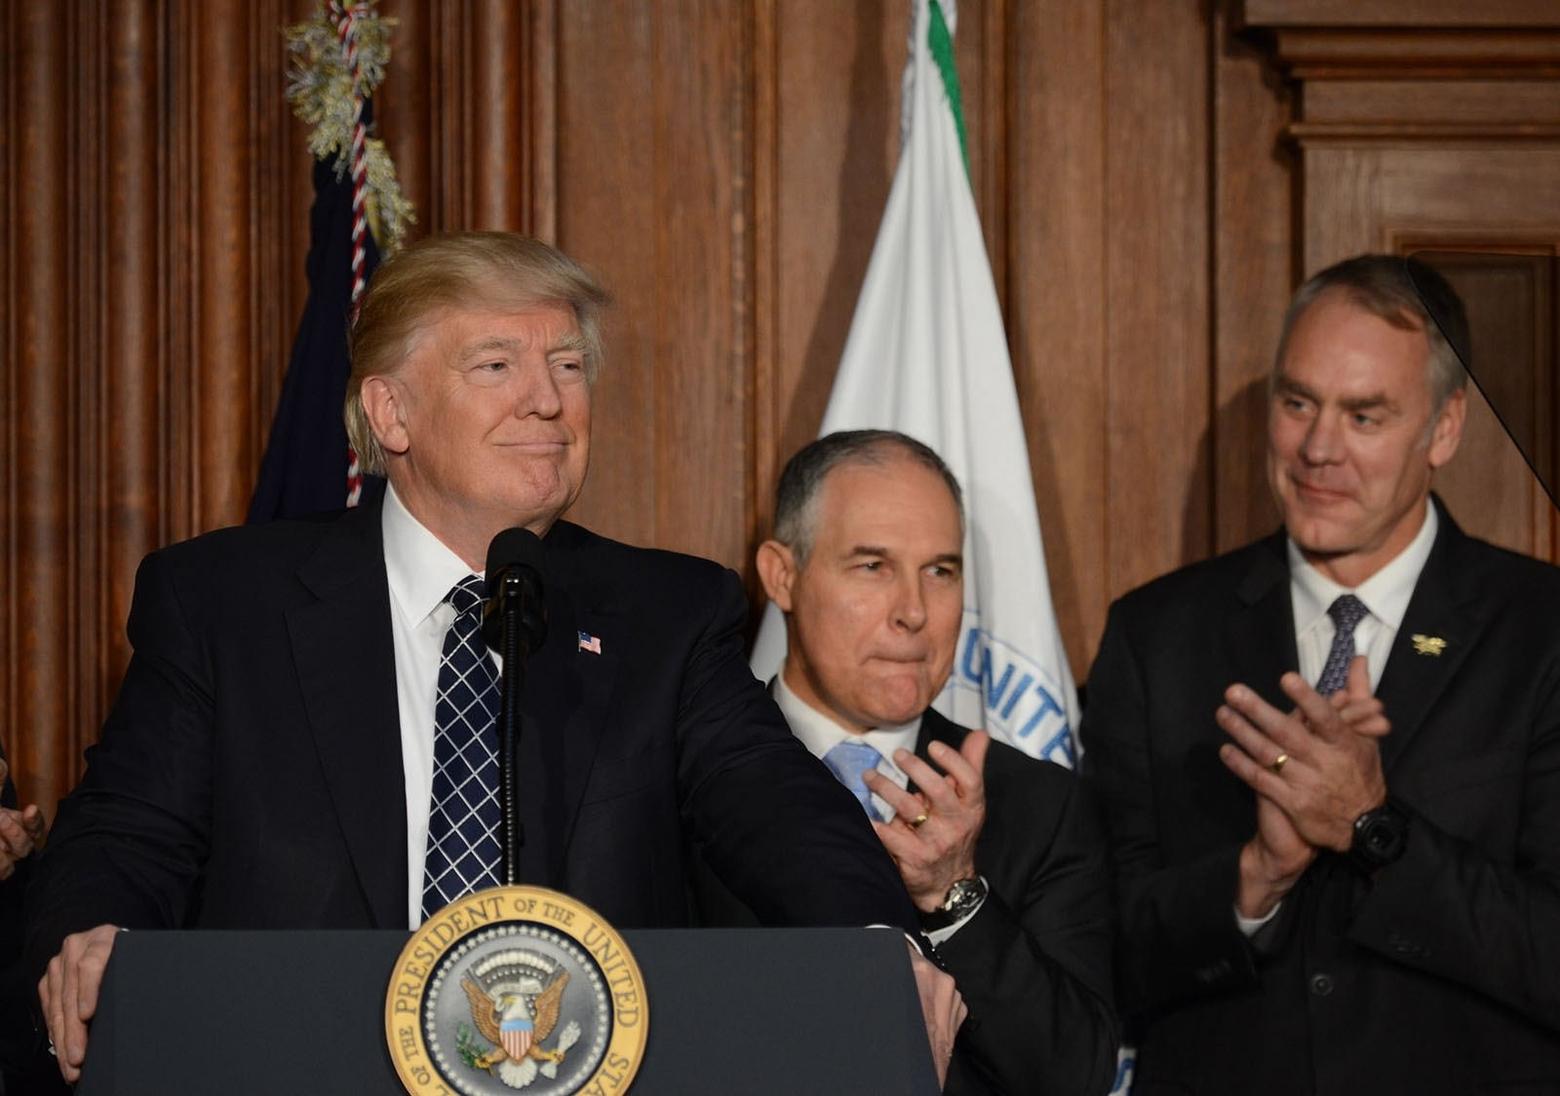 President Donald Trump and two of his main embattled cabinet secretaries who wield huge sway over U.S environmental policy and America's public lands, EPA Administrator Scott Pruitt and Interior Secretary Ryan Zinke. Photo courtesy US Interior Department